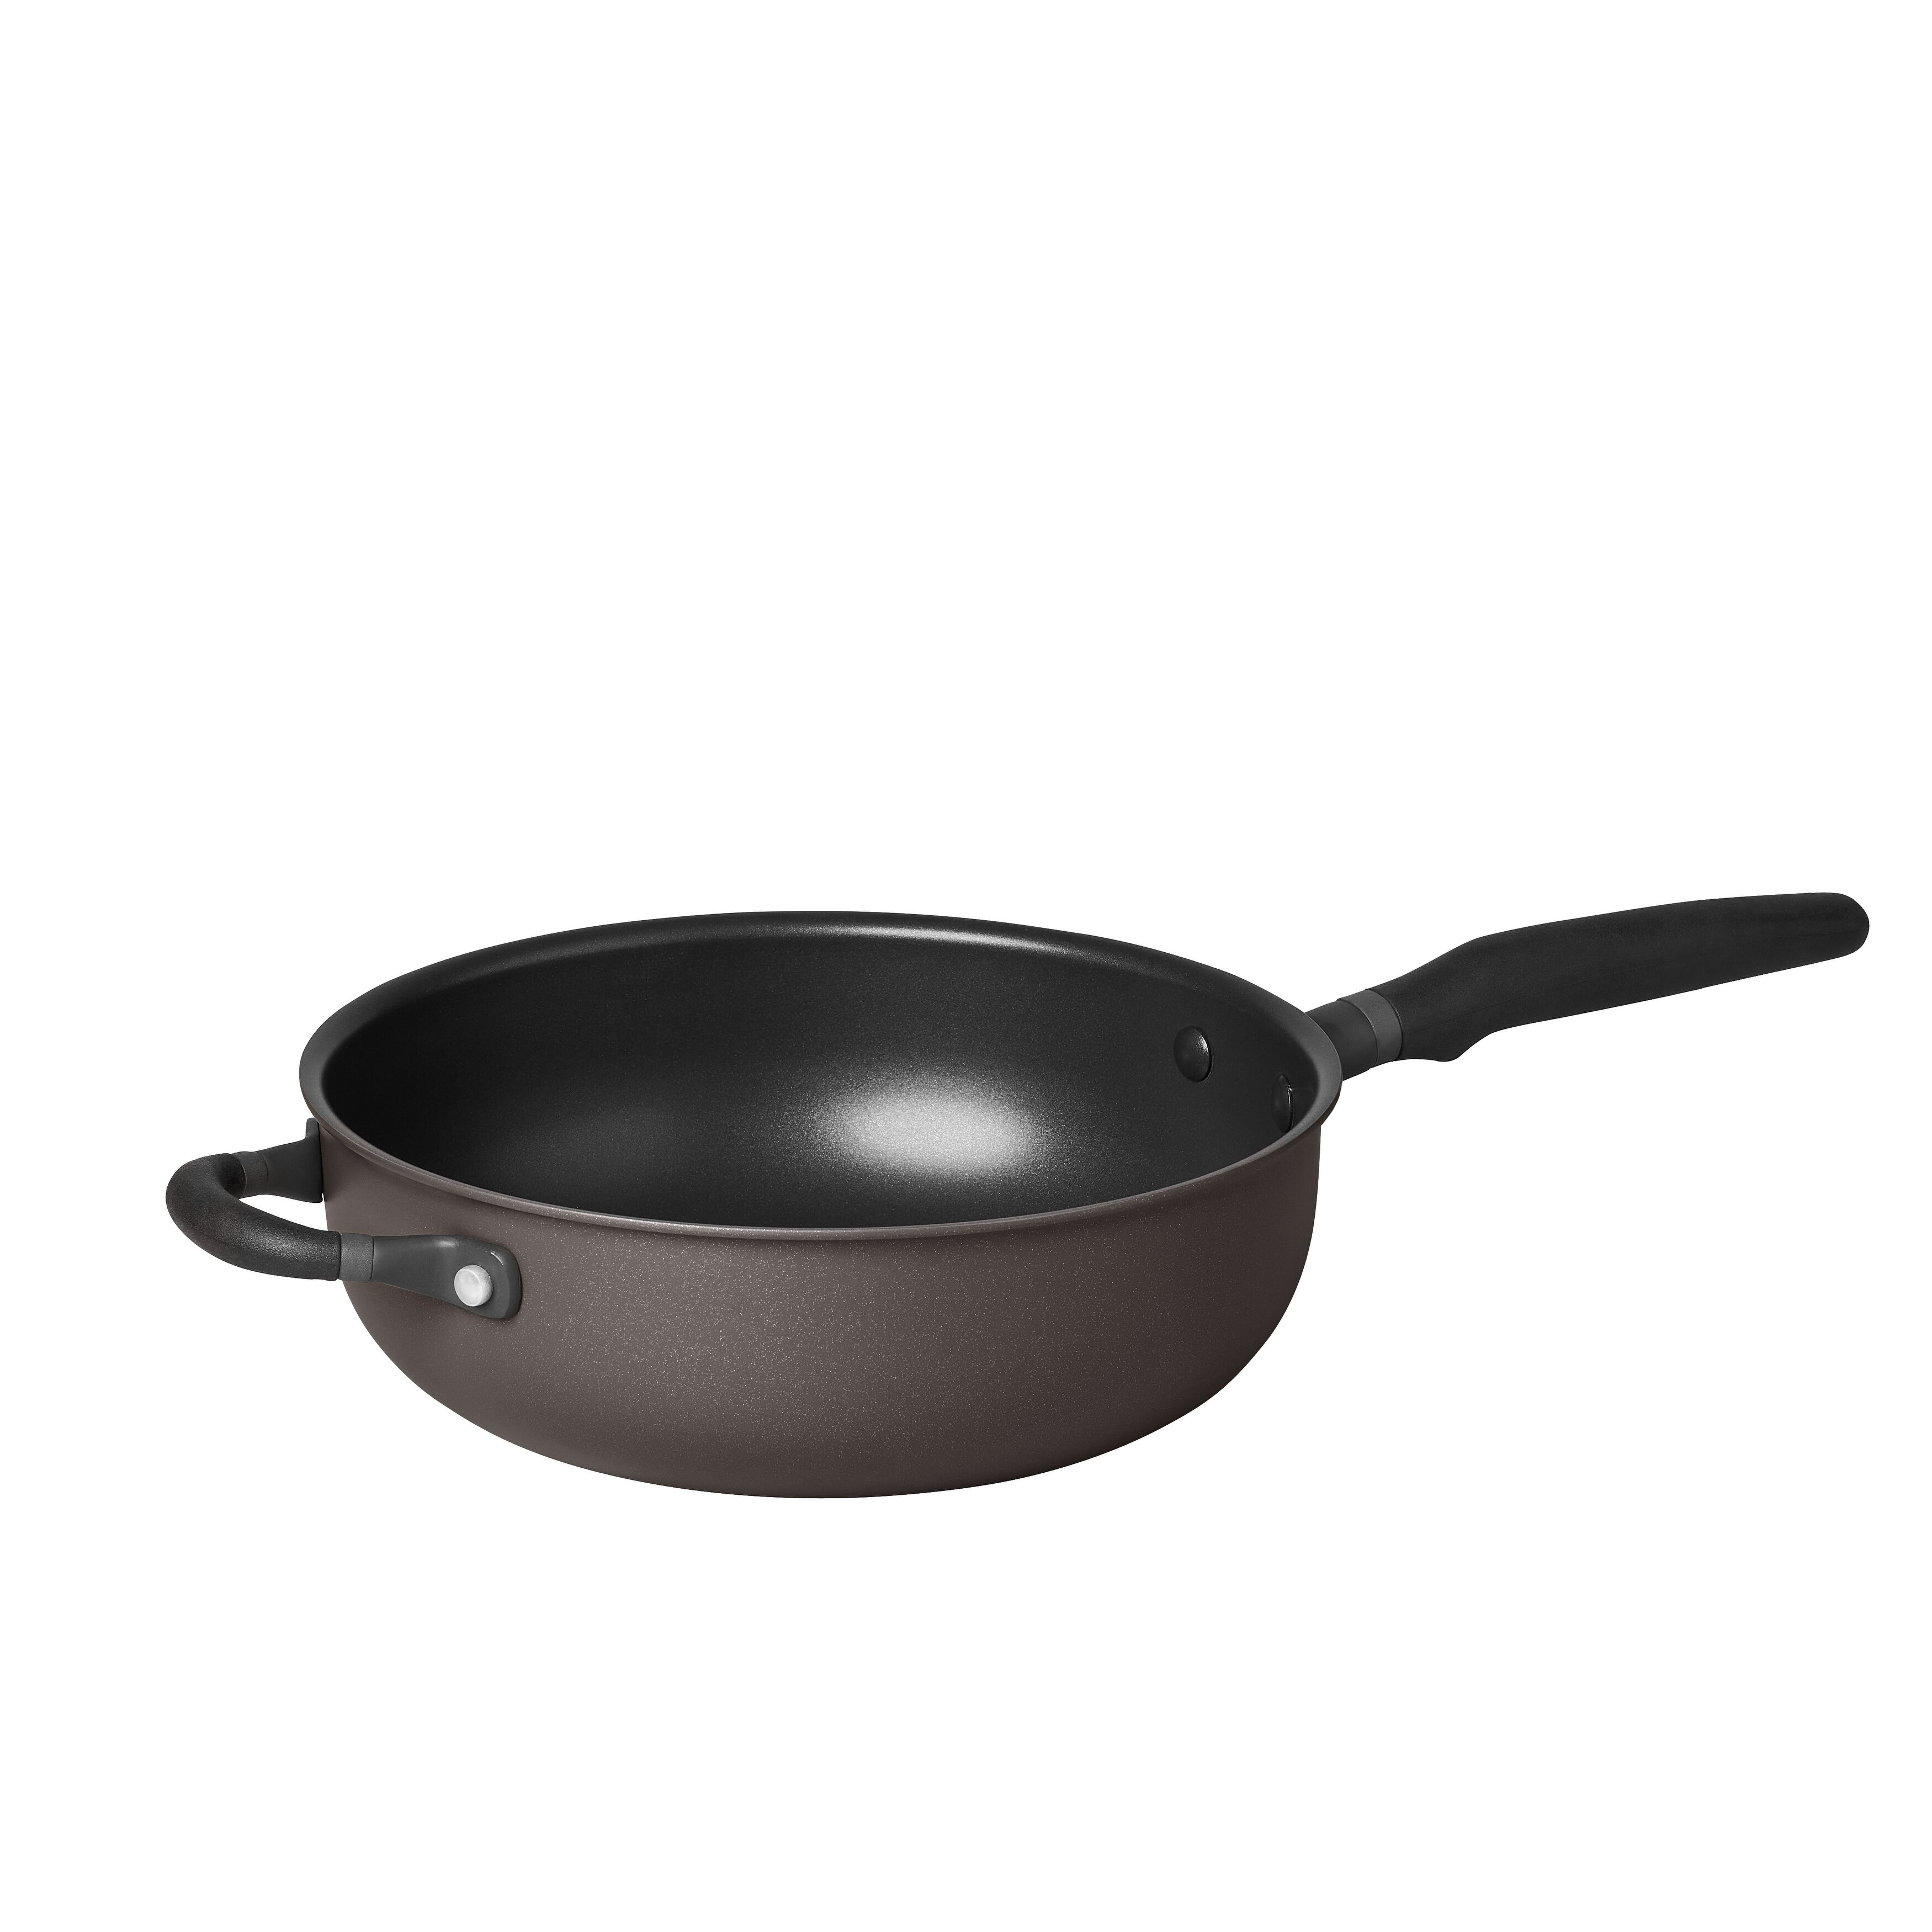 https://ak1.ostkcdn.com/images/products/is/images/direct/f47cdfd8b7485a89f17036ec2ca9cf4e74af0f7d/Meyer-Accent-Series-Nonstick-and-Stainless-Steel-Induction-Cookware-Essentials-Set%2C-6-Piece%2C-Cinder-and-Smoke-Edition.jpg